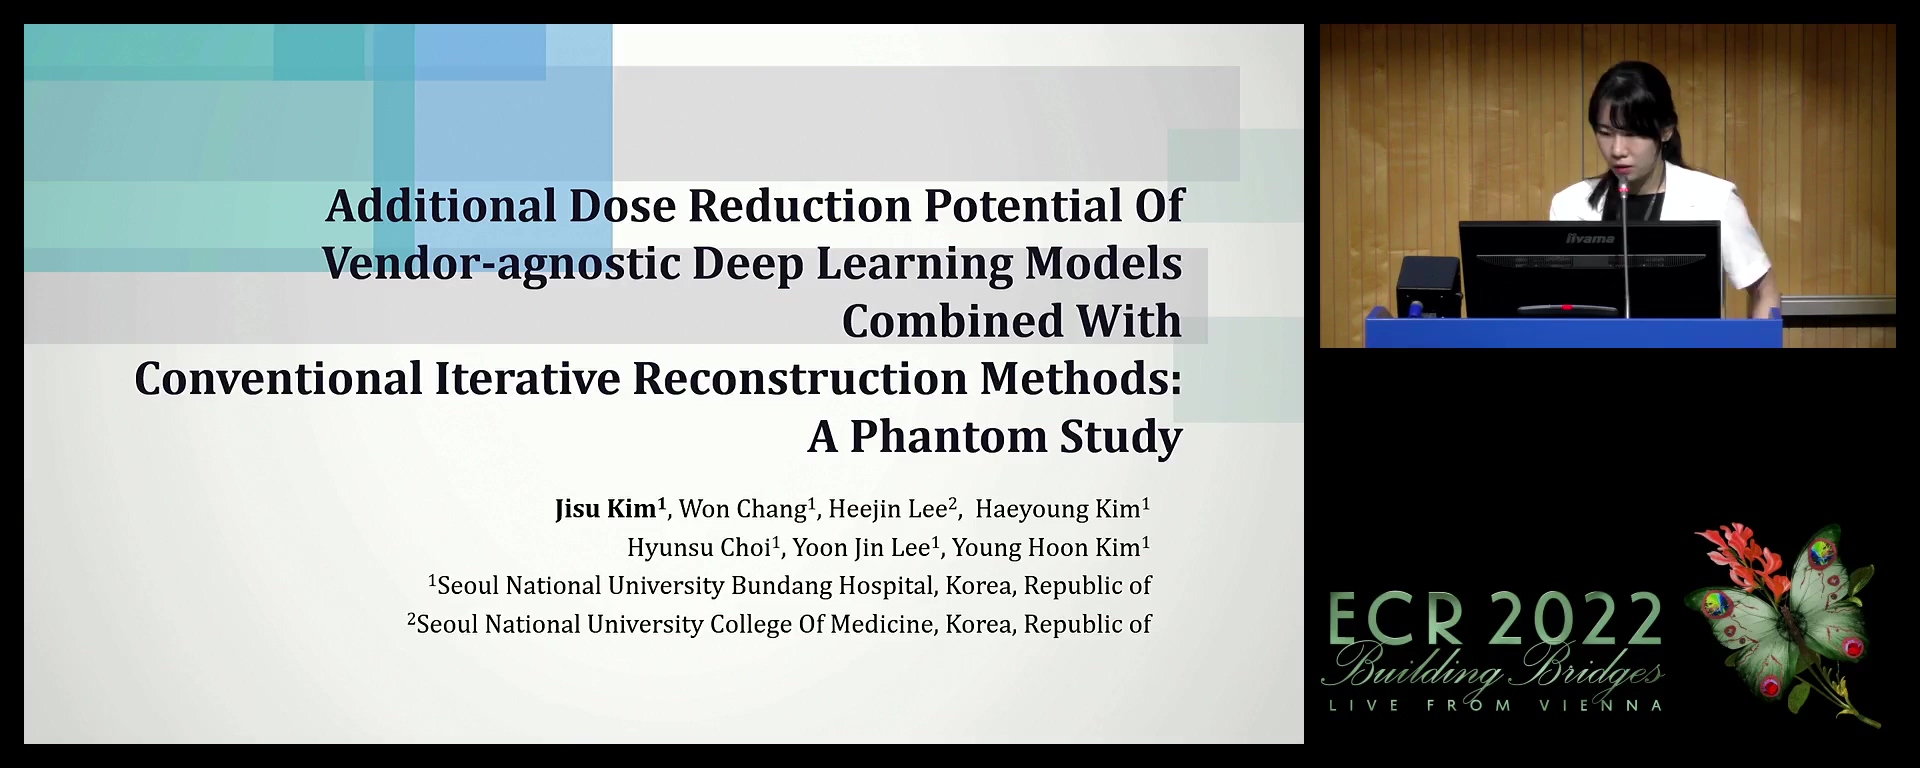 Additional dose reduction potential of vendor-agnostic deep learning models combined with conventional iterative reconstruction methods: a phantom study